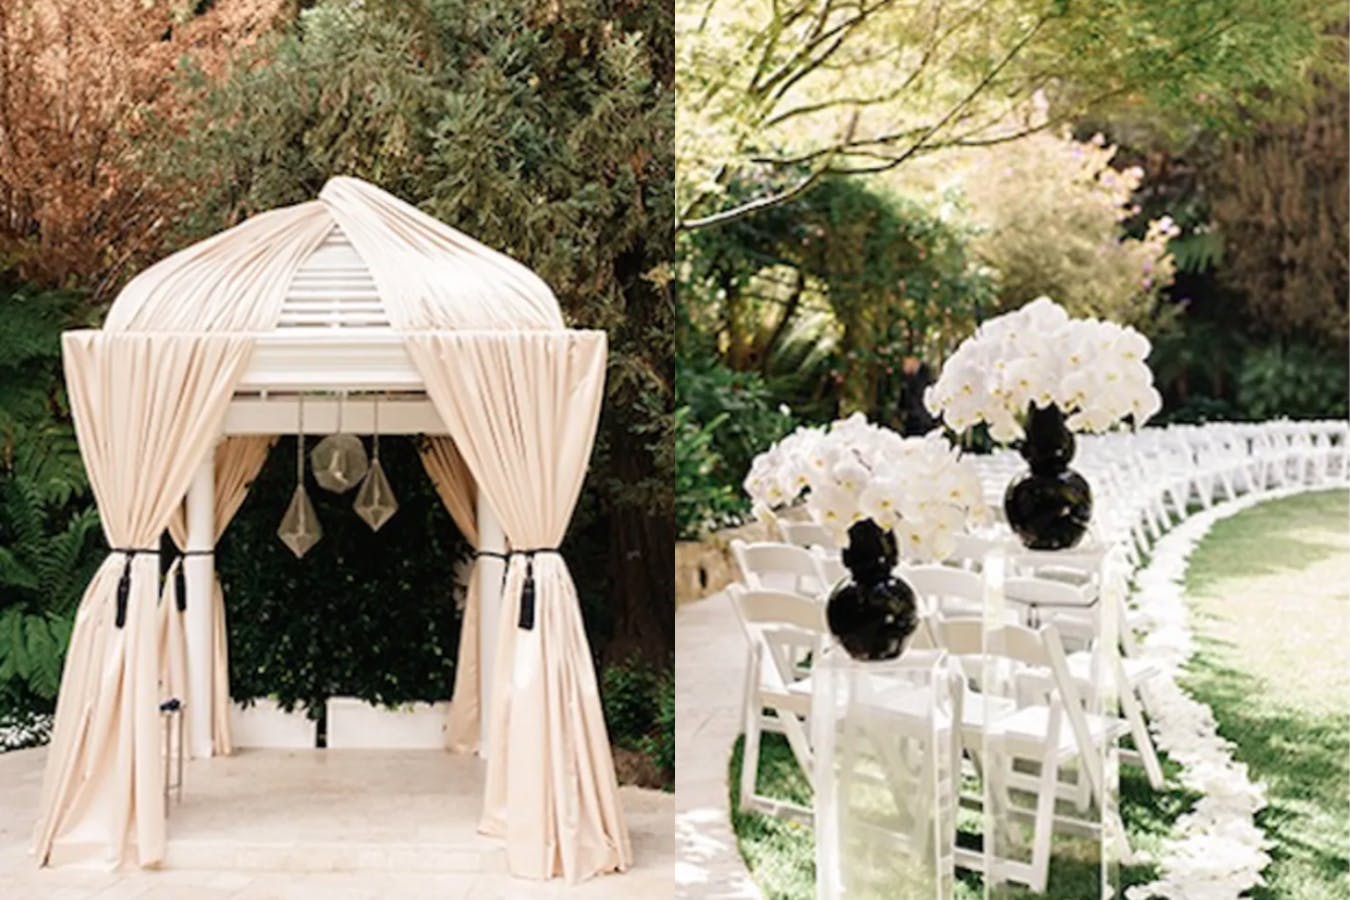 Outdoor Wedding Ceremony With Black and White Wedding Décor | PartySlate